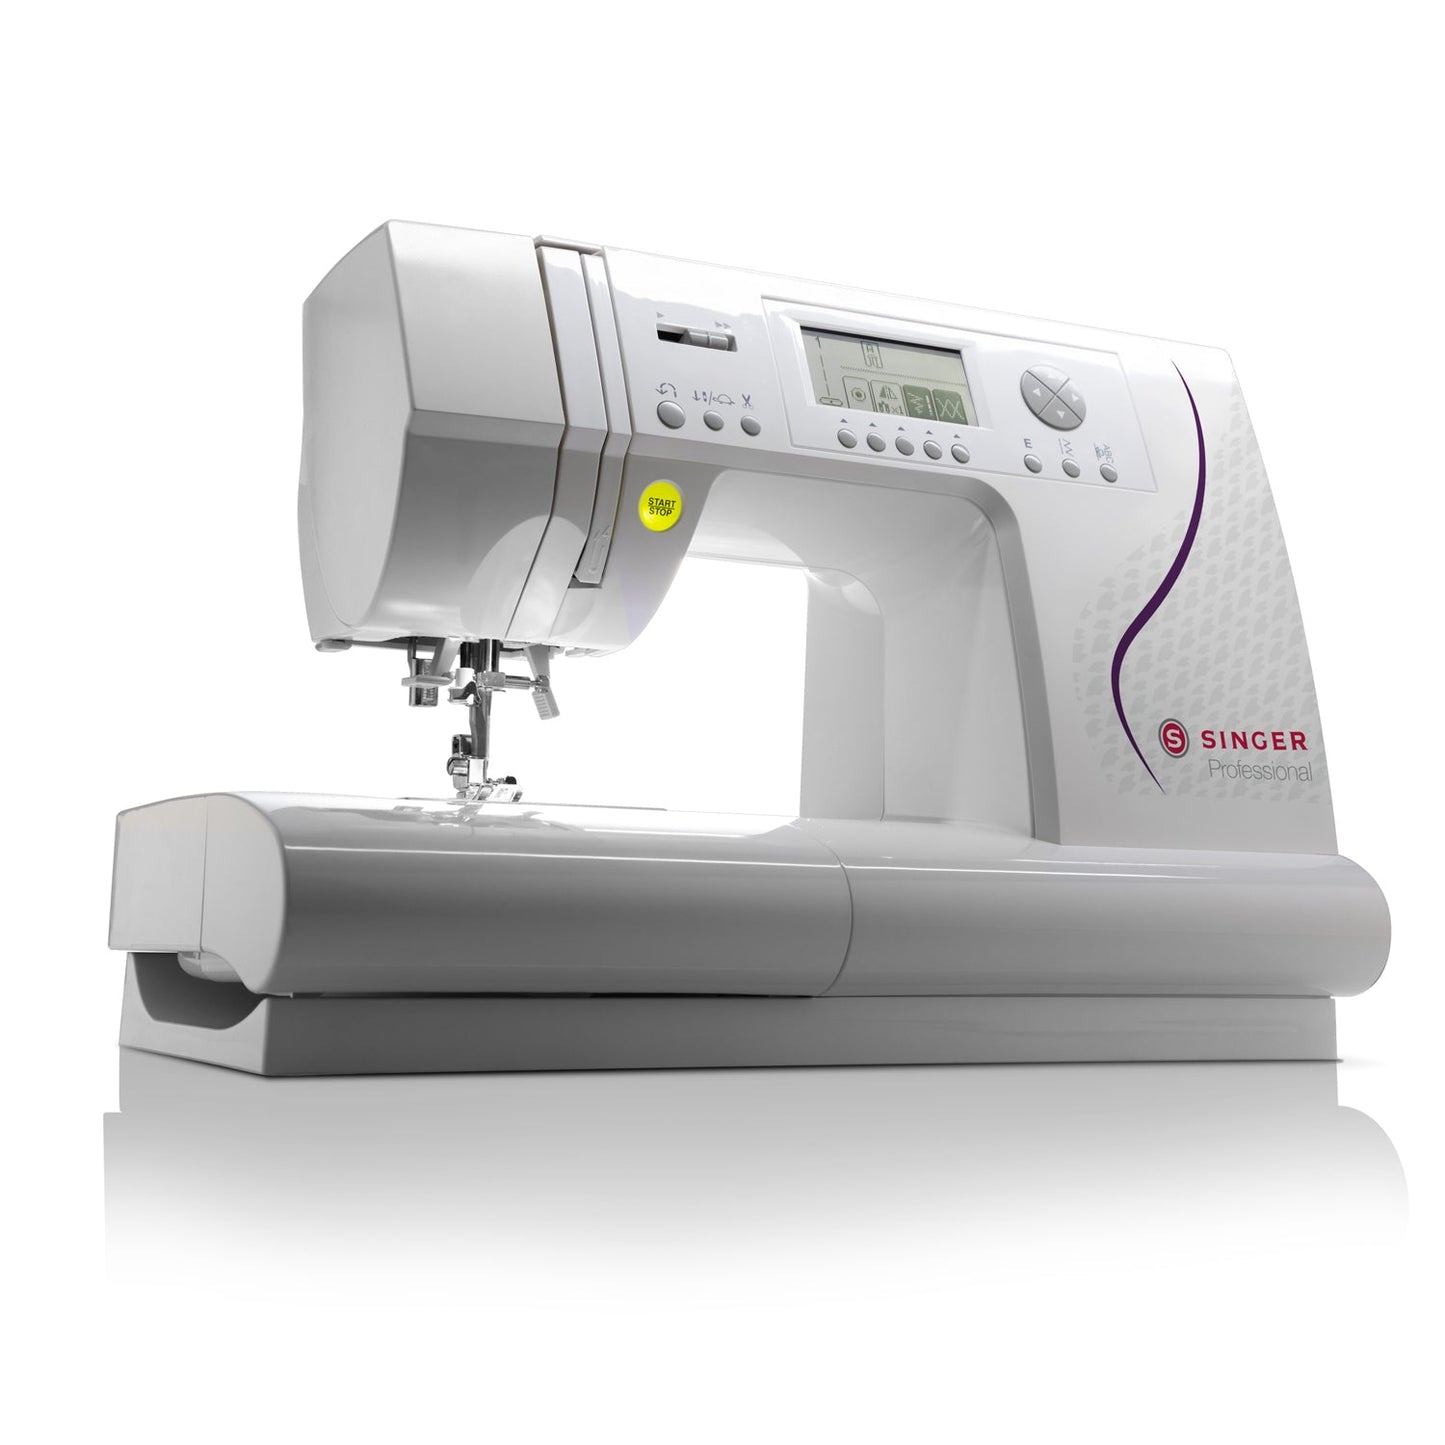 Singer Professional C430 - Auto Thread Cutter, Ultimate Spec with 810 stitch patterns, 5 fonts * Summer Sewing Offer *